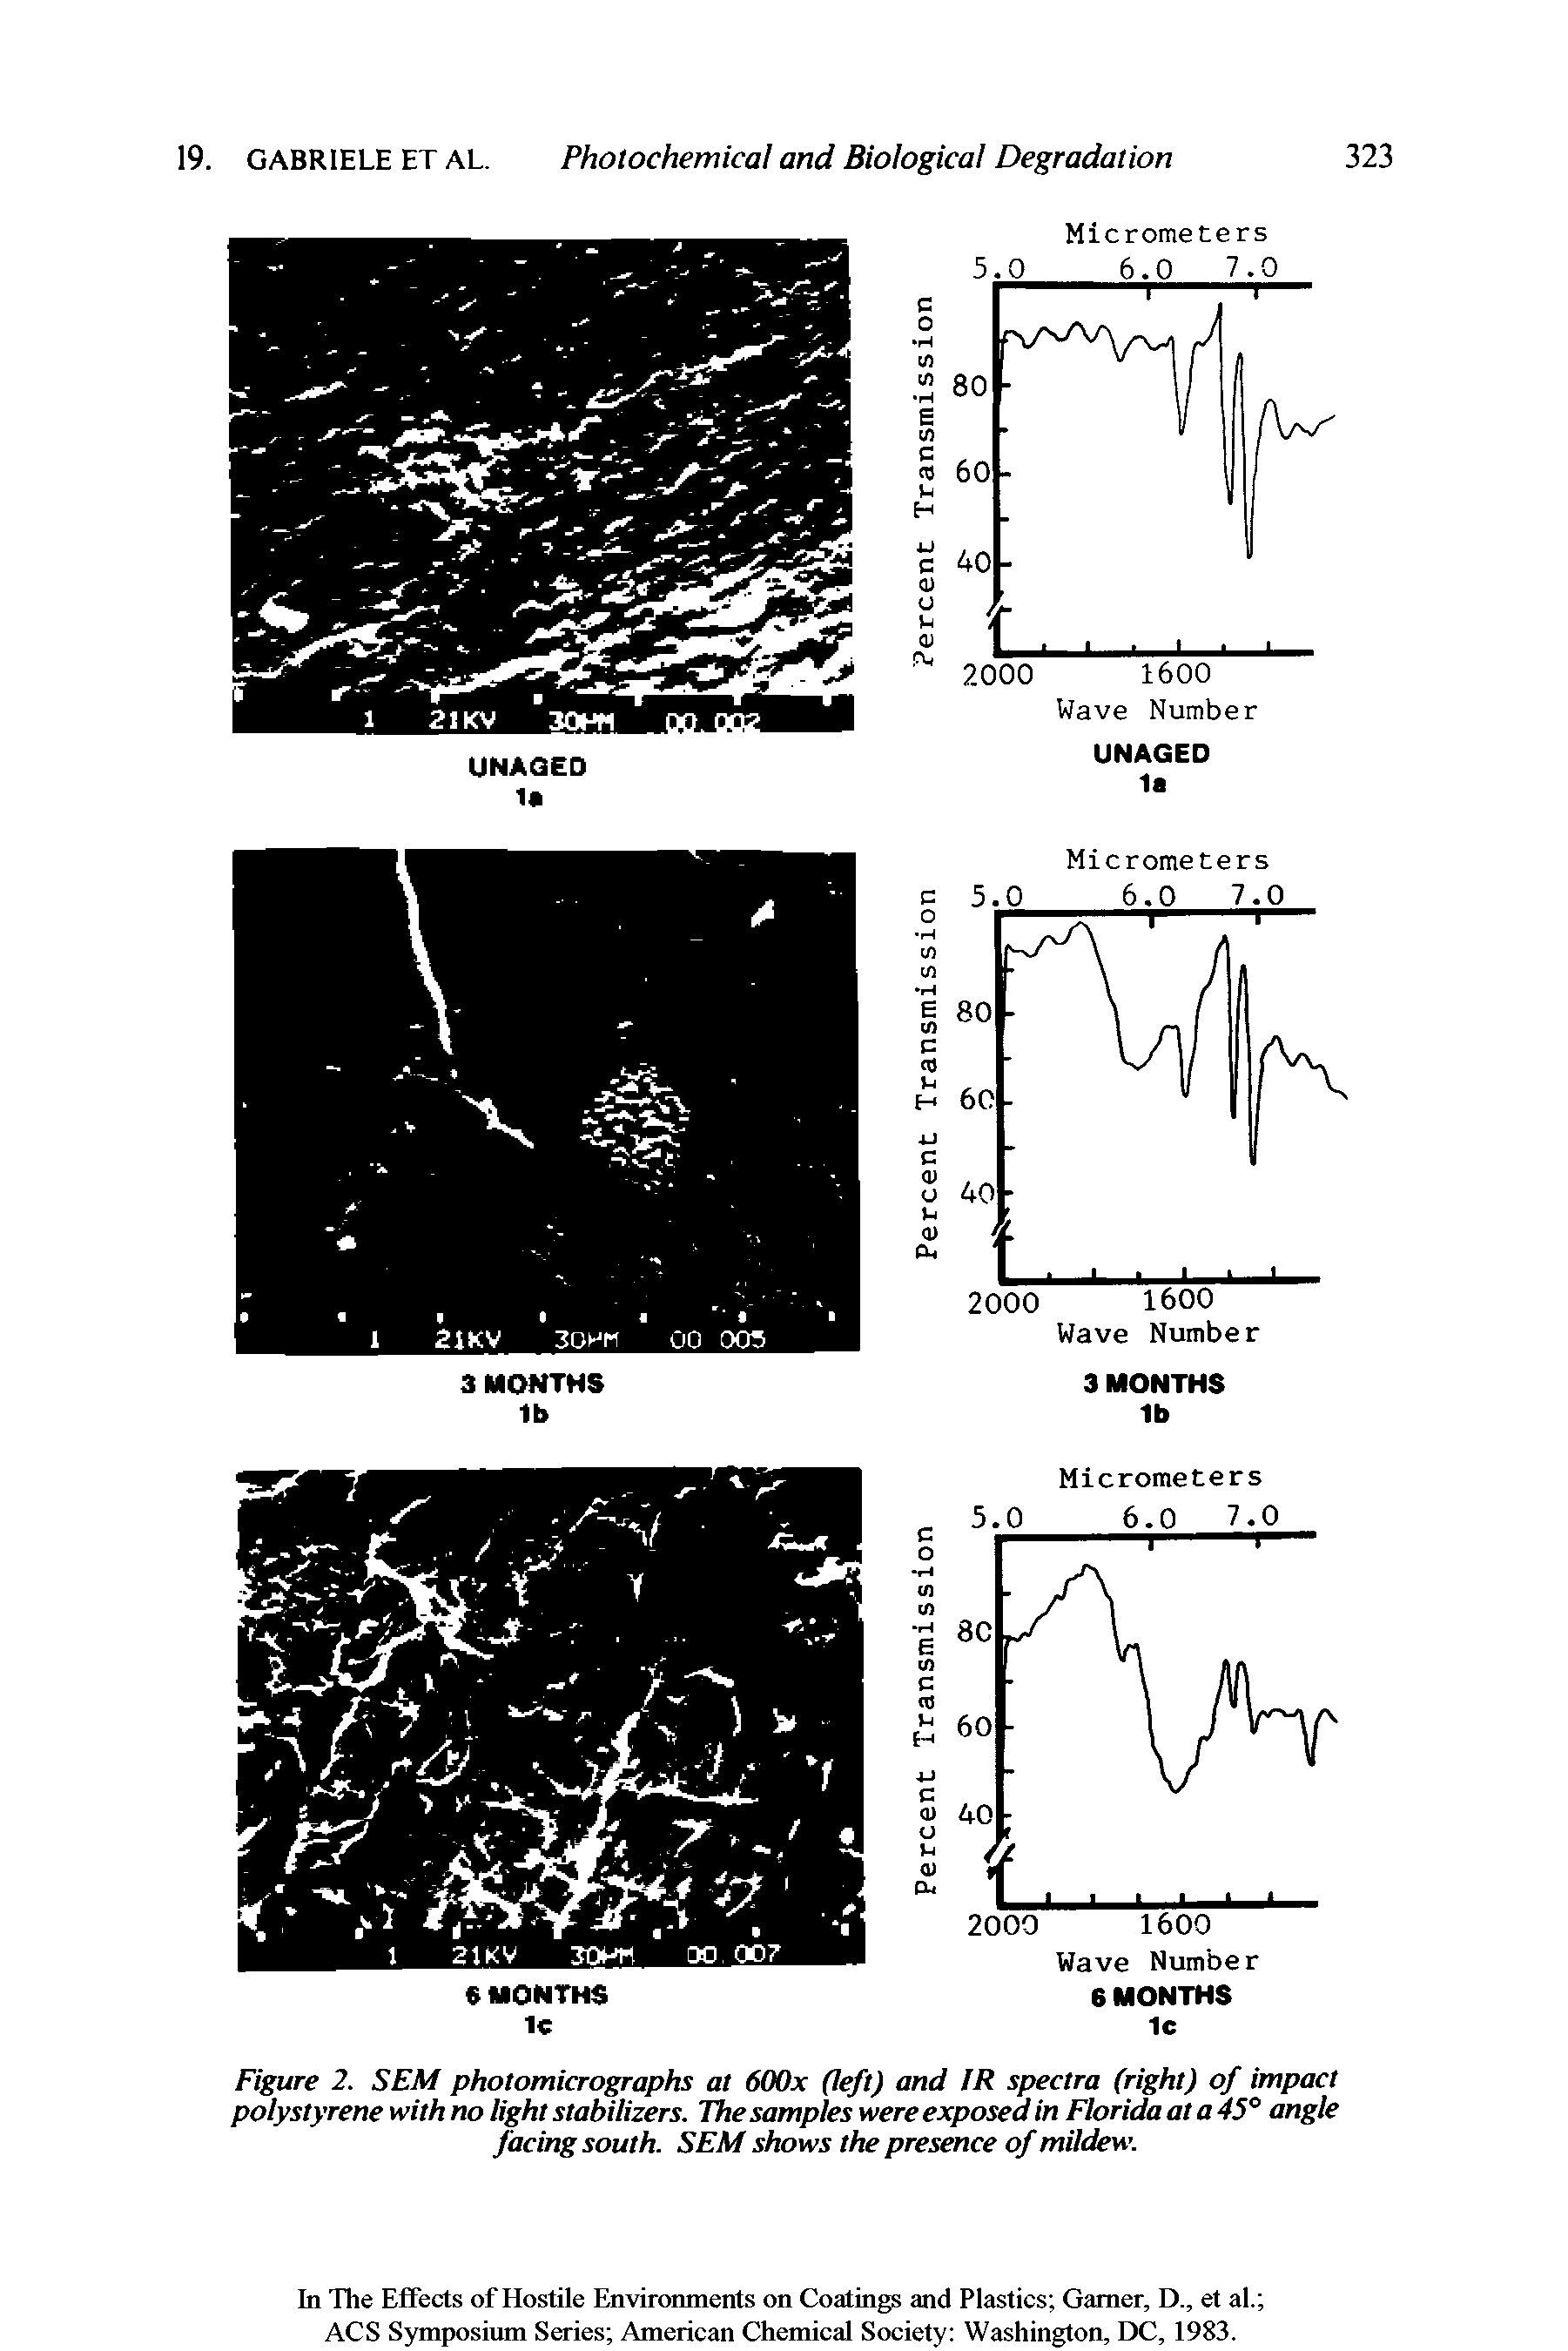 Figure 2. SEM photomicrographs at 600x (left) and IR spectra (right) of impact polystyrene with no light stabilizers. The samples were exposed in Florida at a 45° angle...